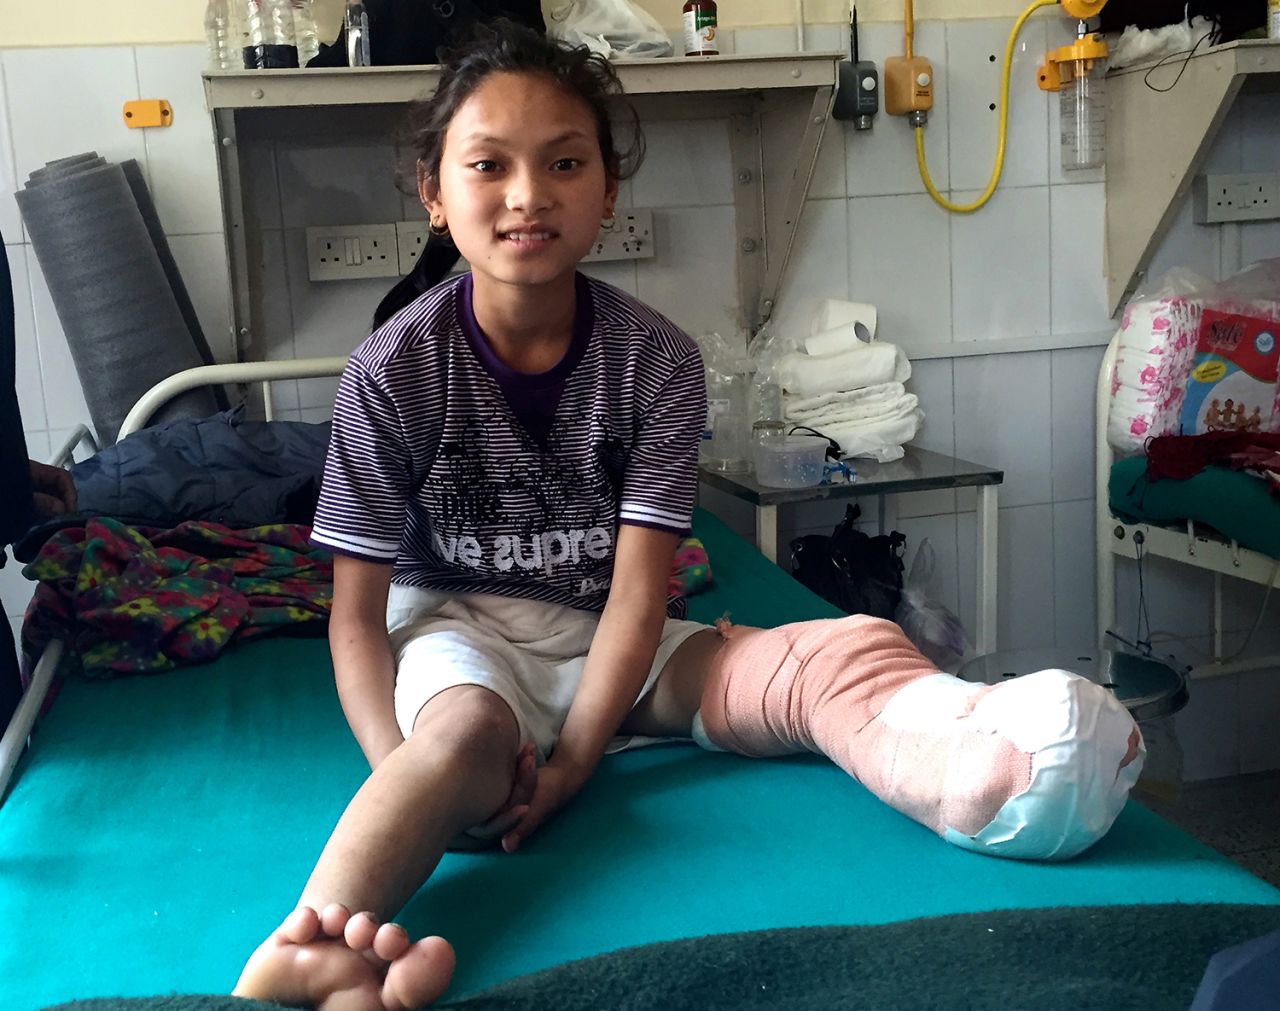 Maya is recovering well, but it's hard to say how she will fare once she returns home to her village in Nepal's Gorkha District, where the terrain is hilly and medical facilities are basic.